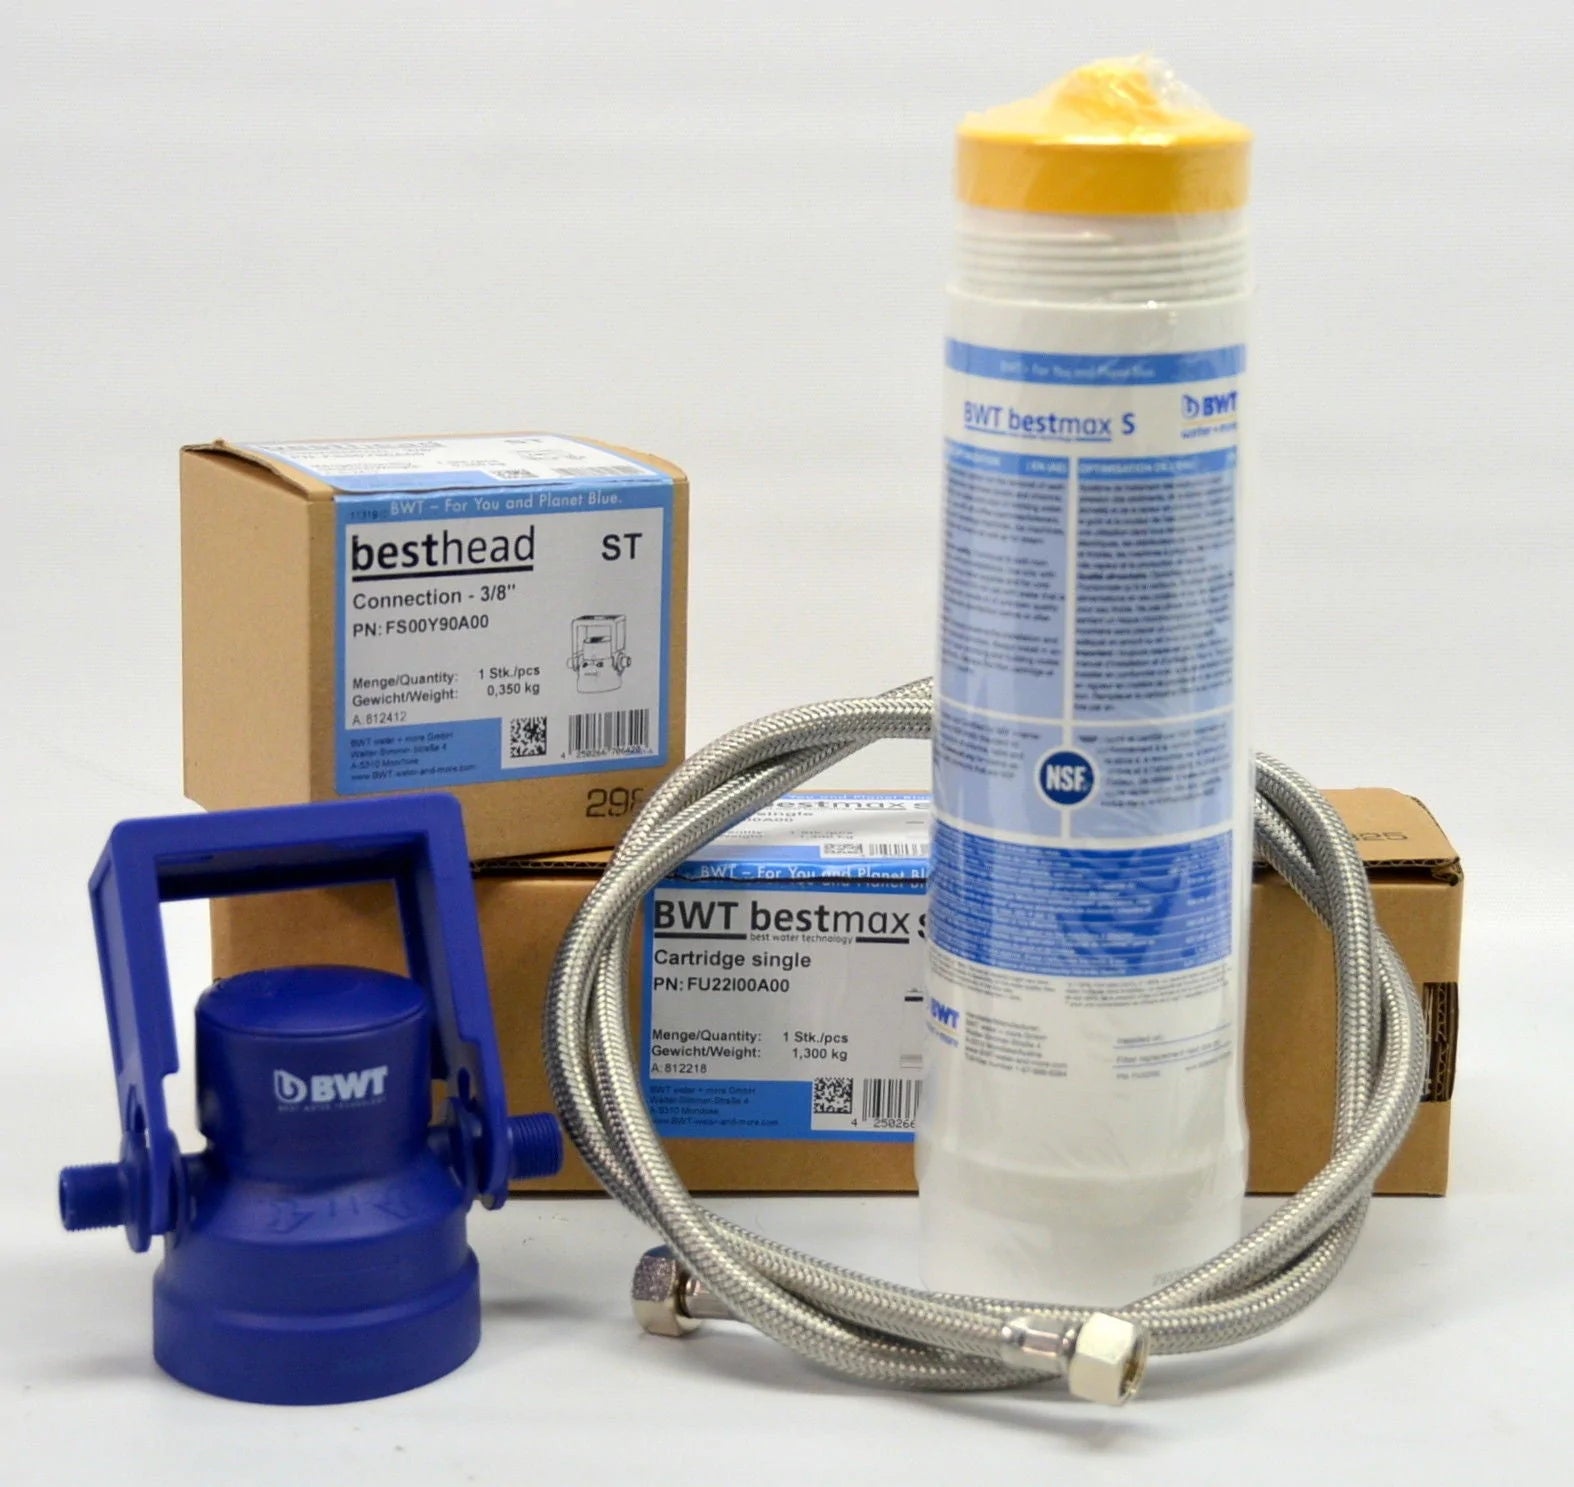 BWT filter cartridges for water filters and water dispensers